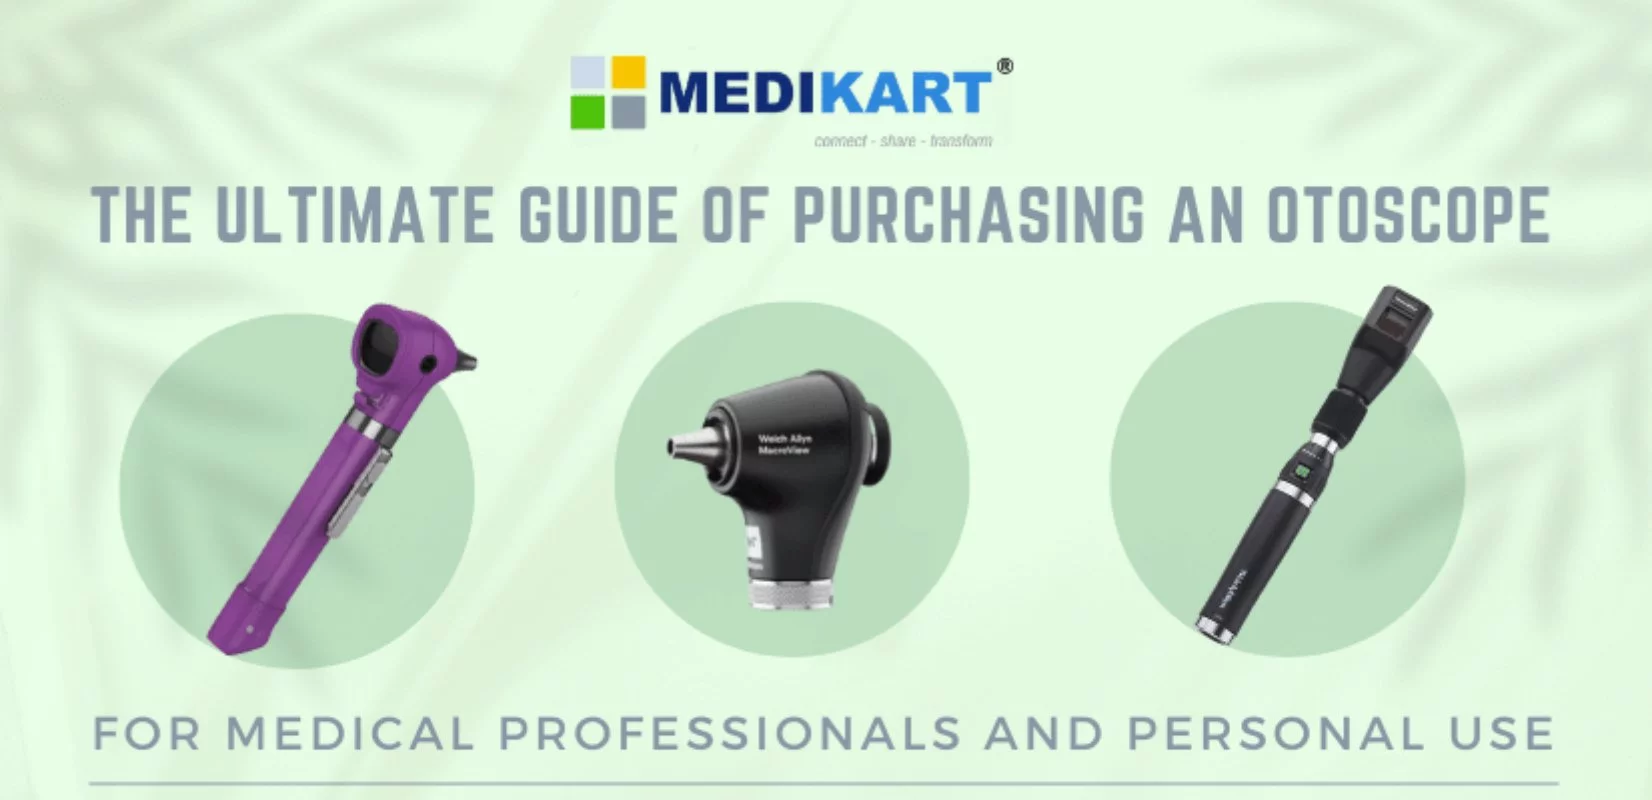 The Ultimate Guide of Purchasing an Otoscope for Medical